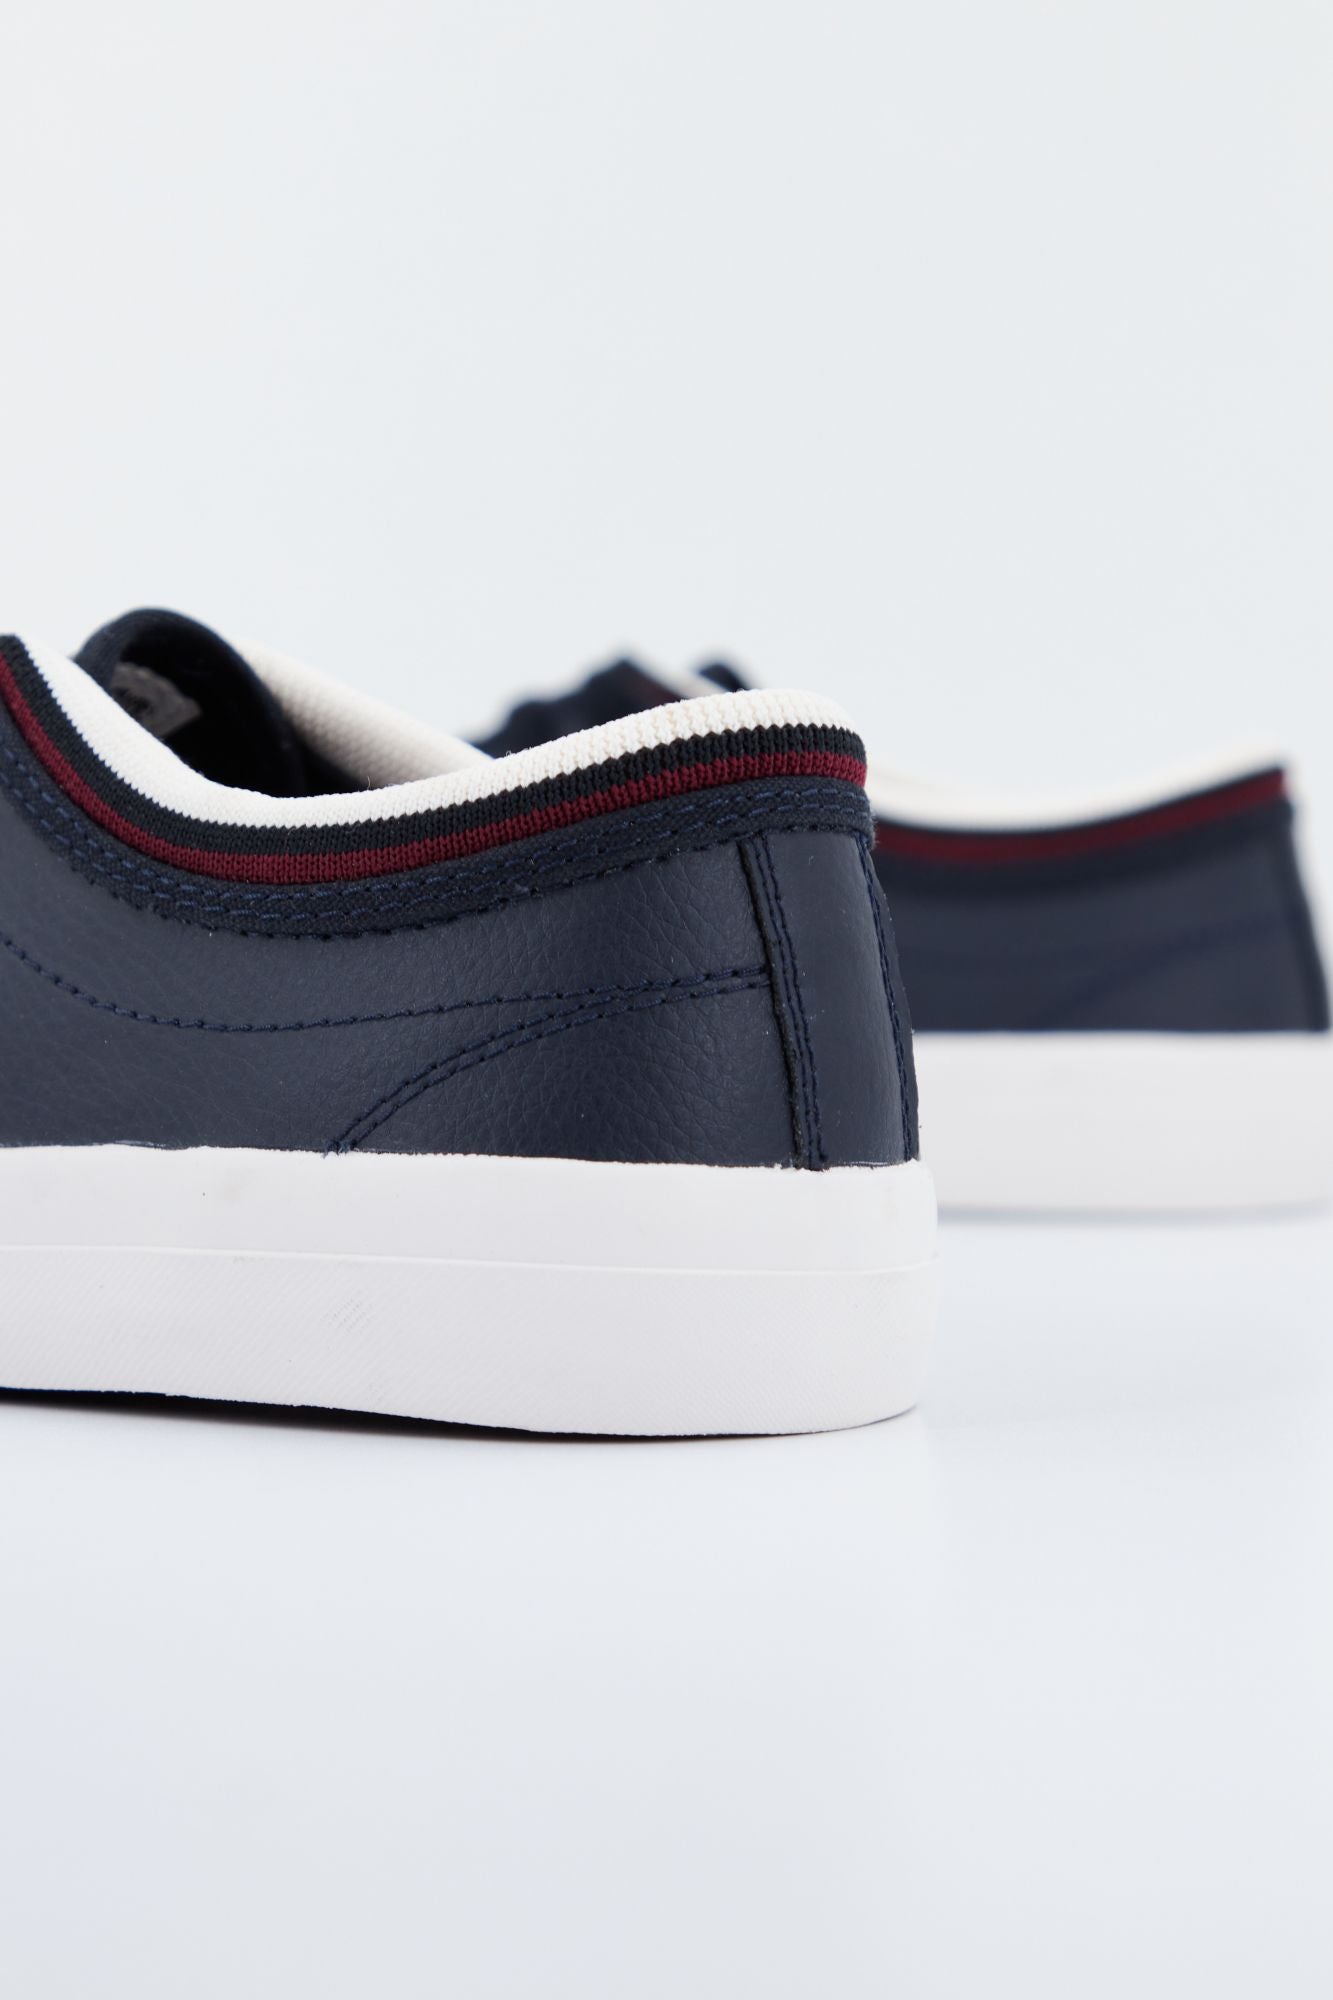 FRED PERRY KENDRICK TIPPED CUF en color AZUL (3)